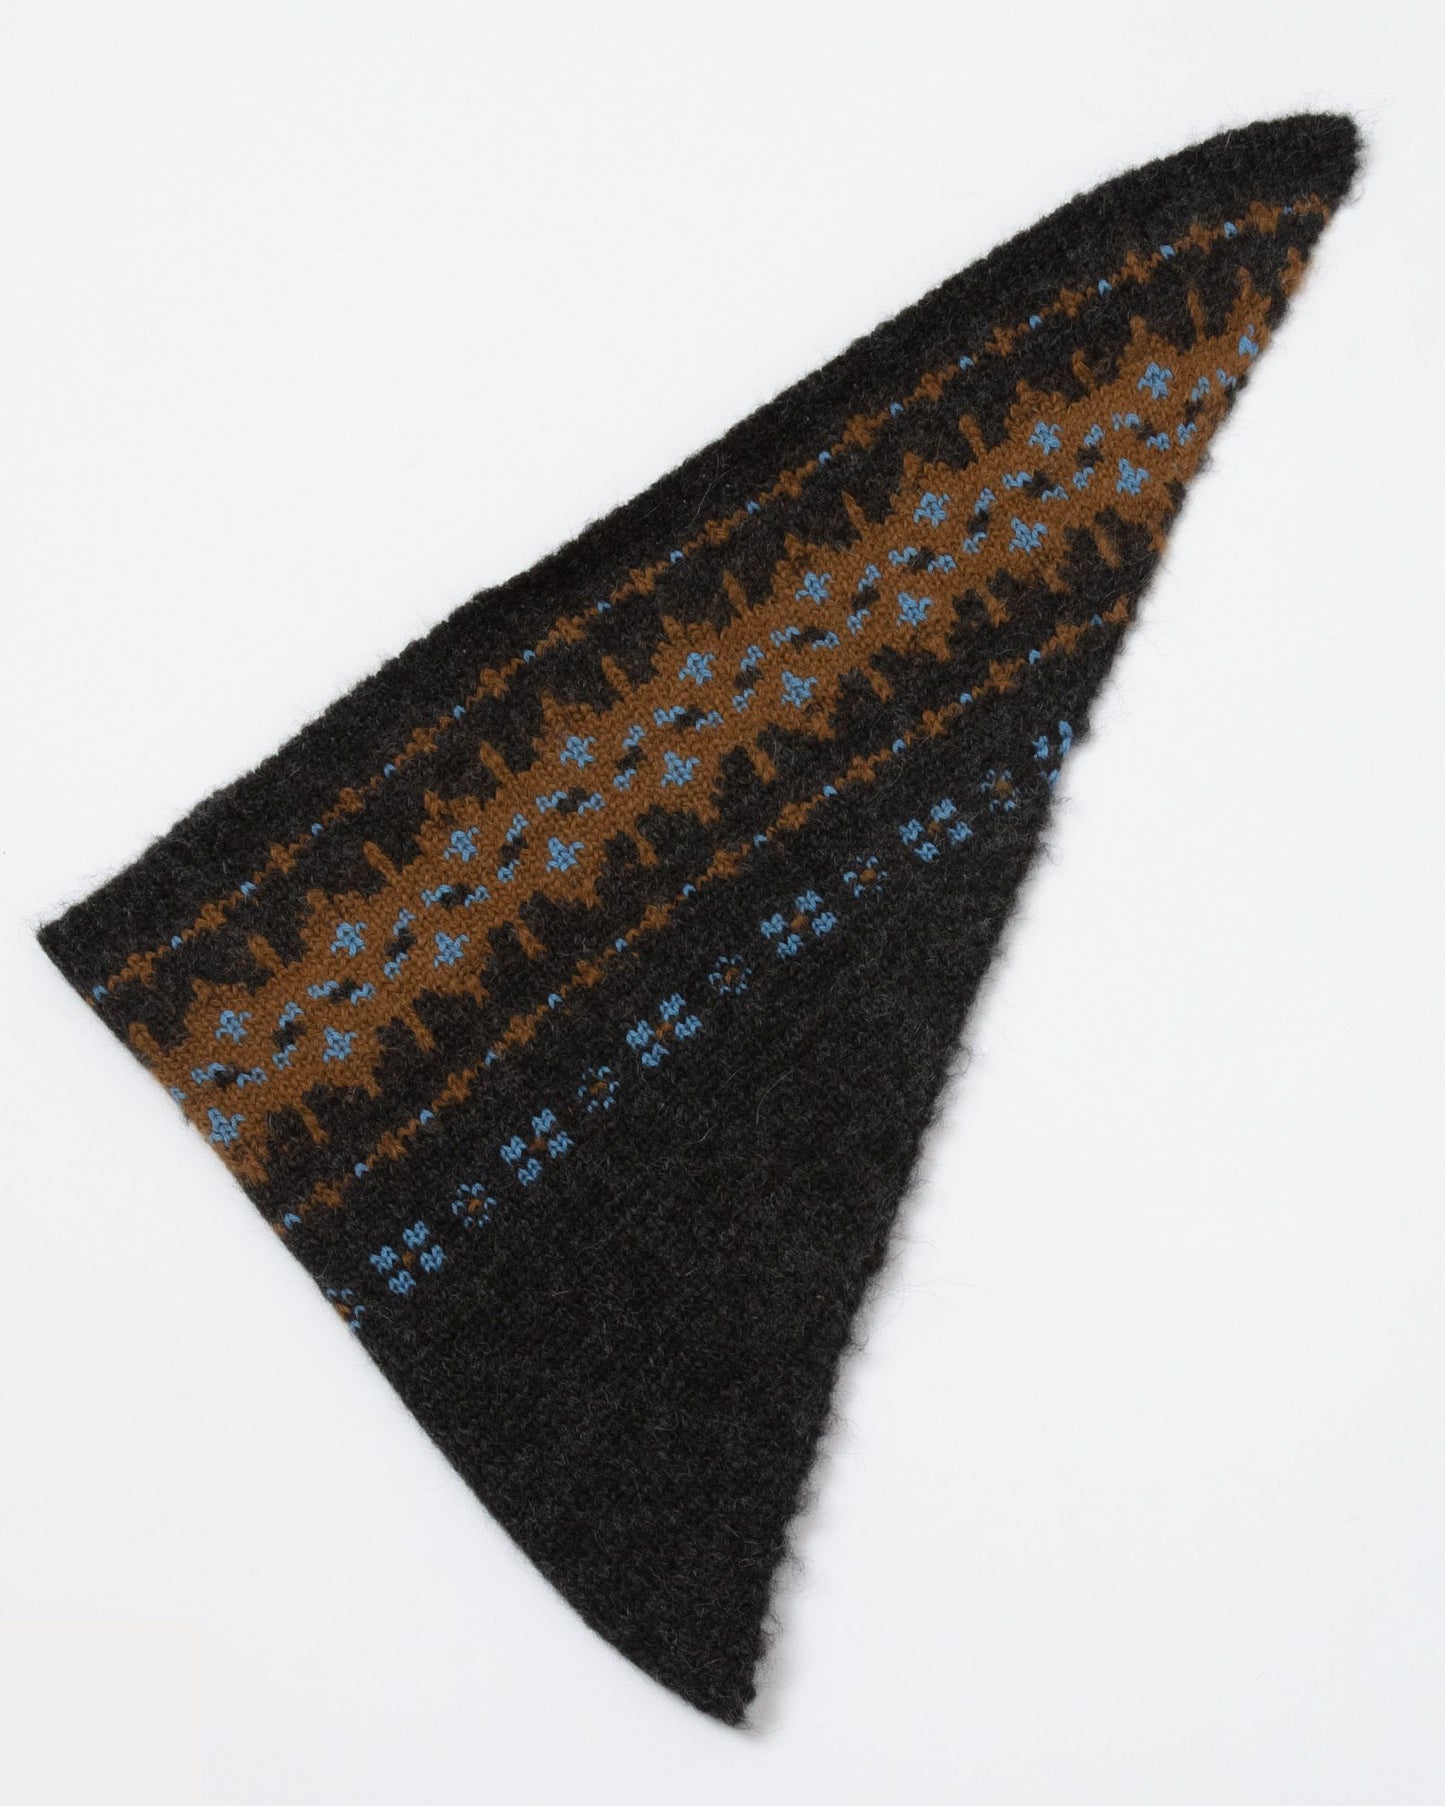 RACHEL COMEY Vetta Scarf in Charcoal available at Lahn.shop